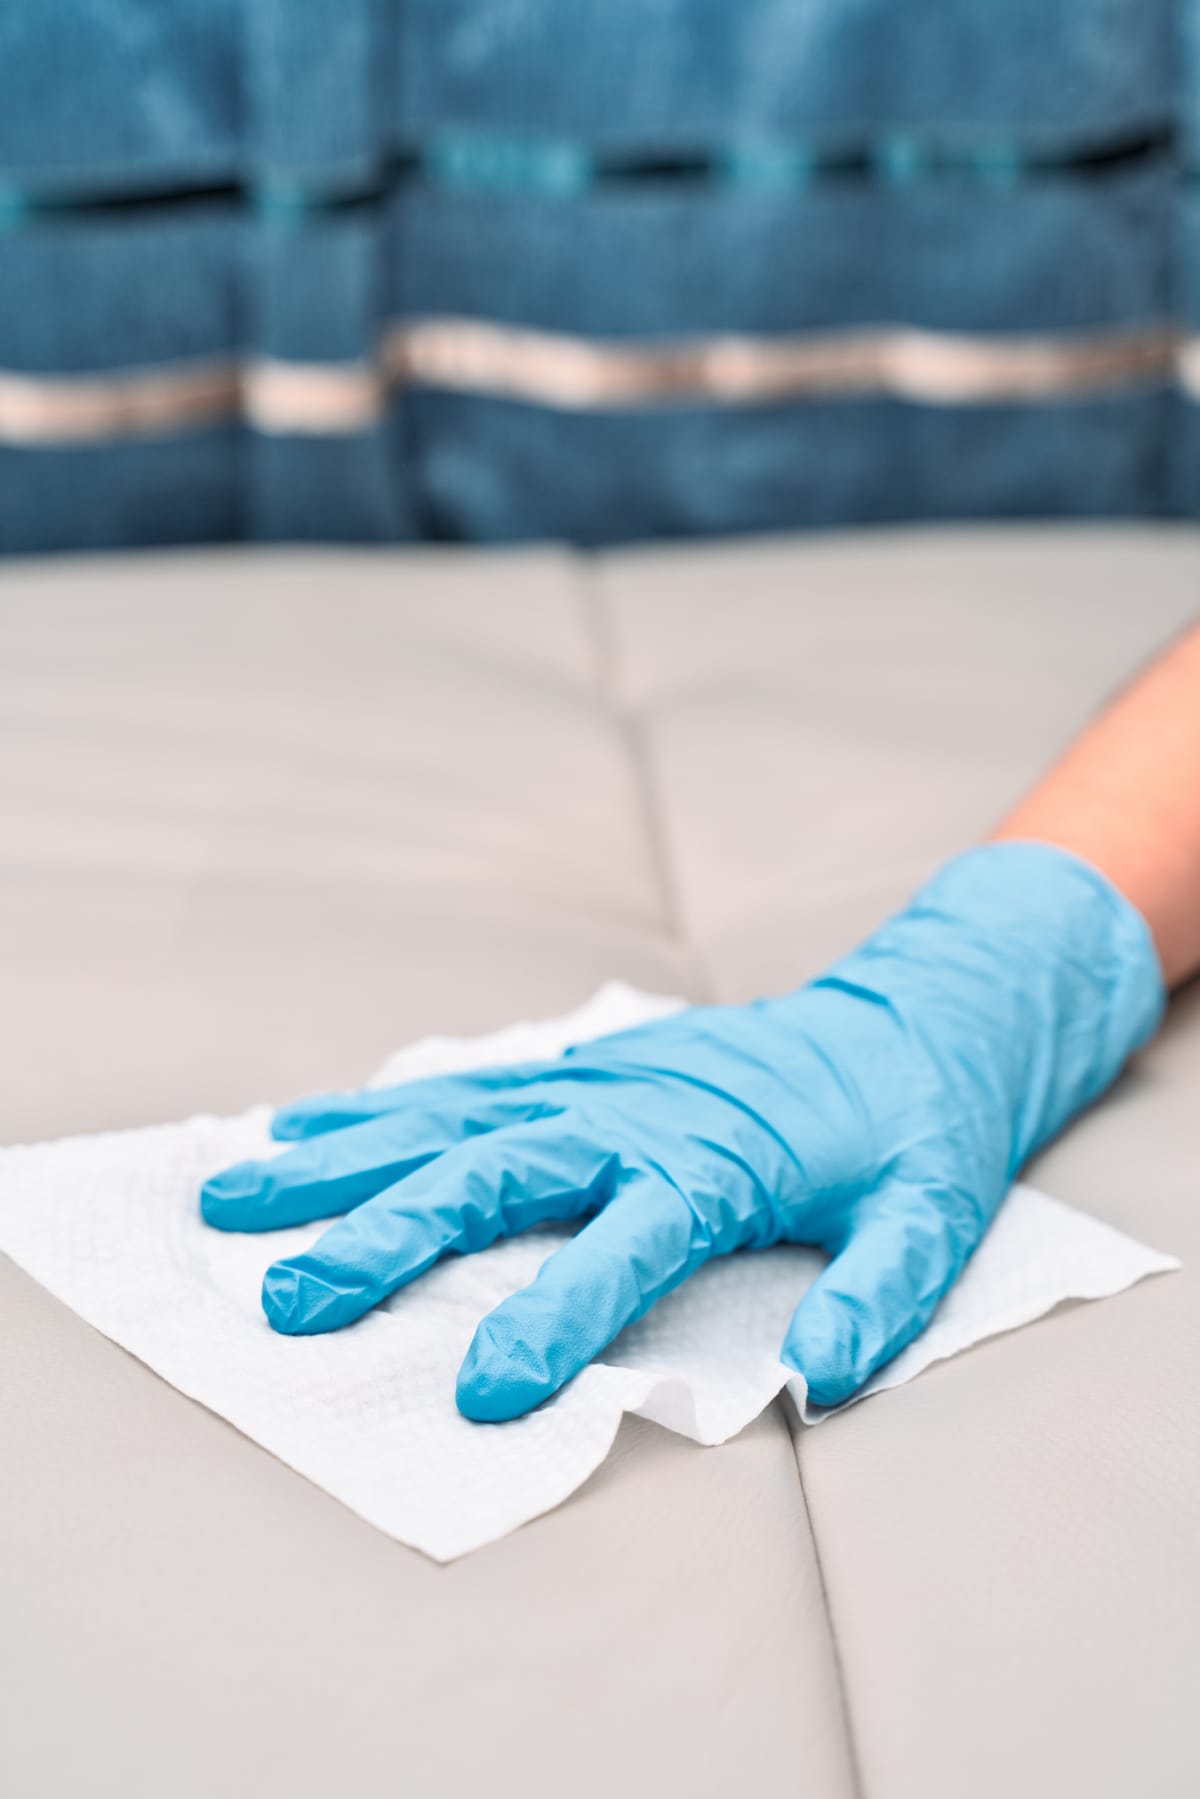 Hands with Blue Protective Glove Wiping Leather Sofa with Wipes